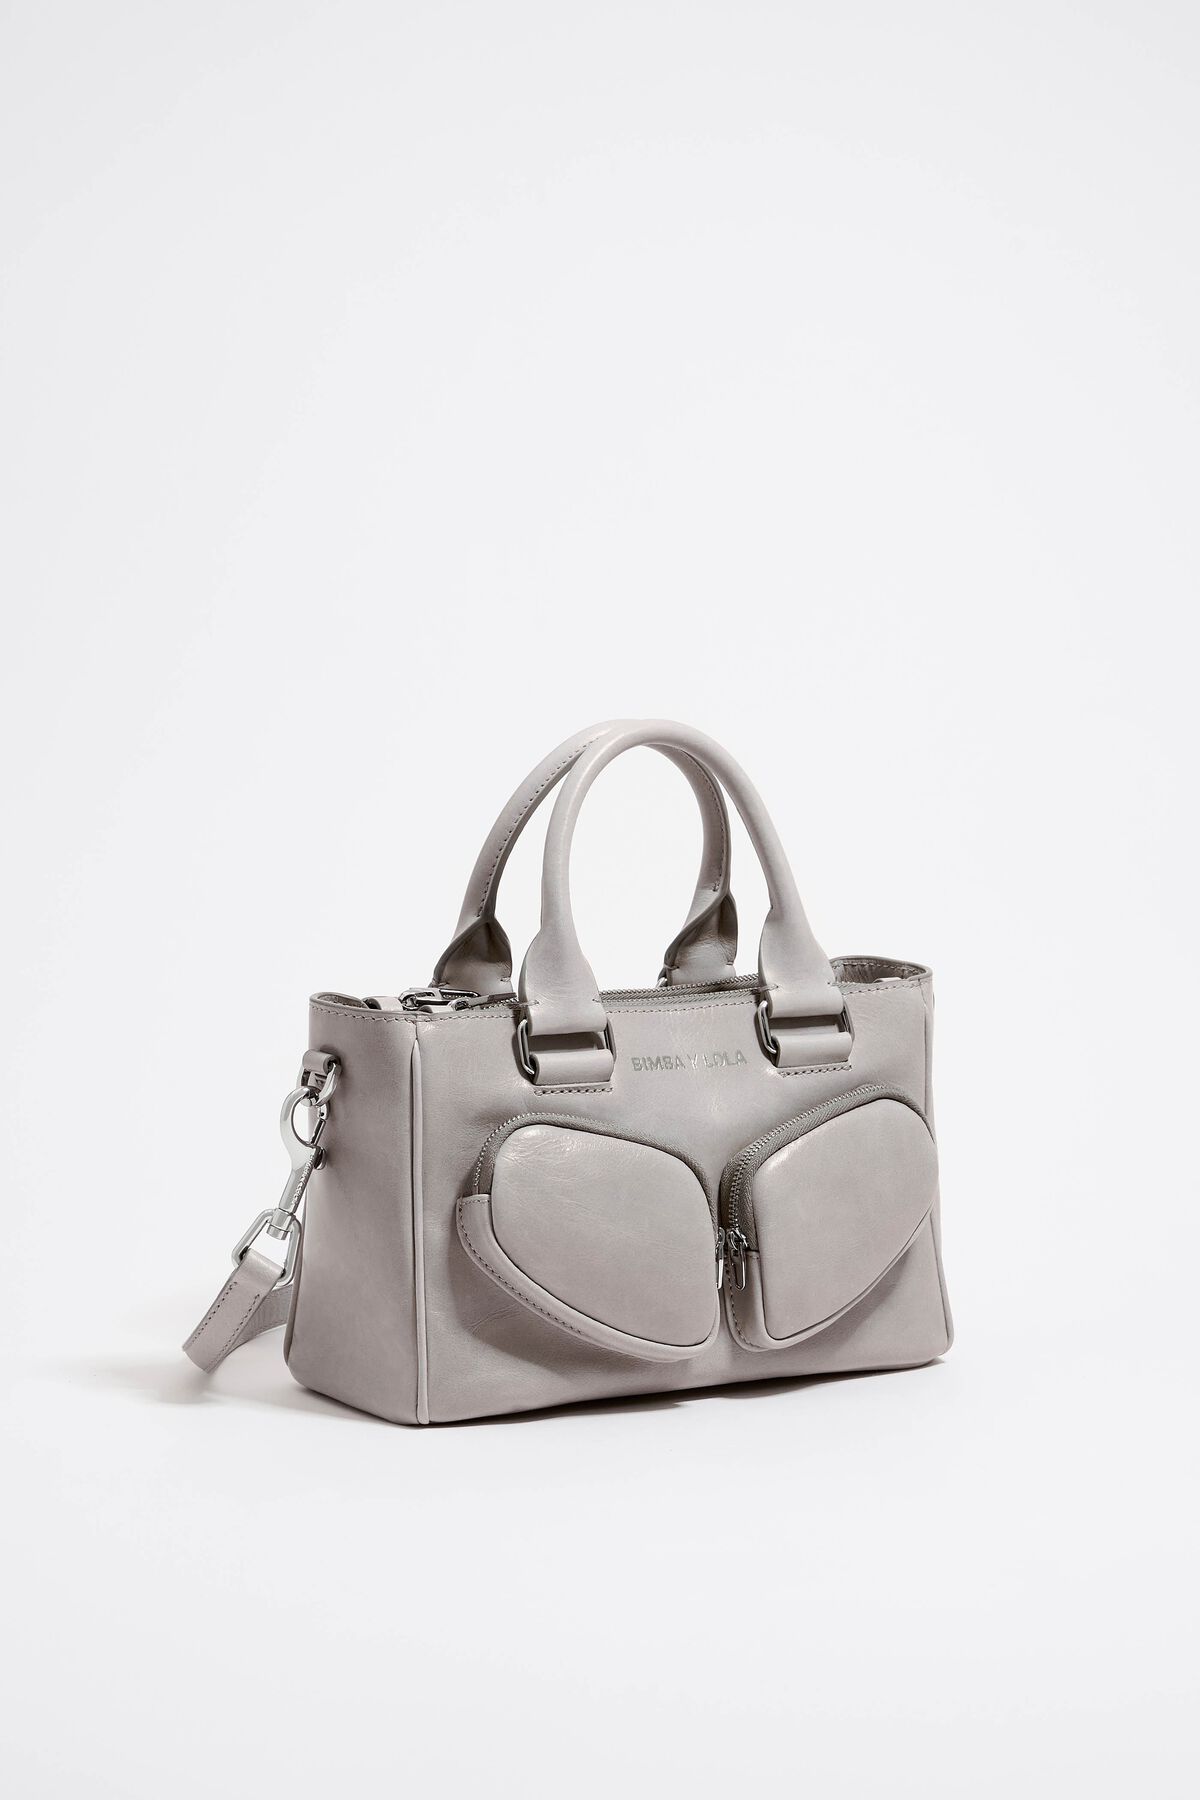 DKNY Shoulder & Crossbody Bags outlet - Women - 1800 products on